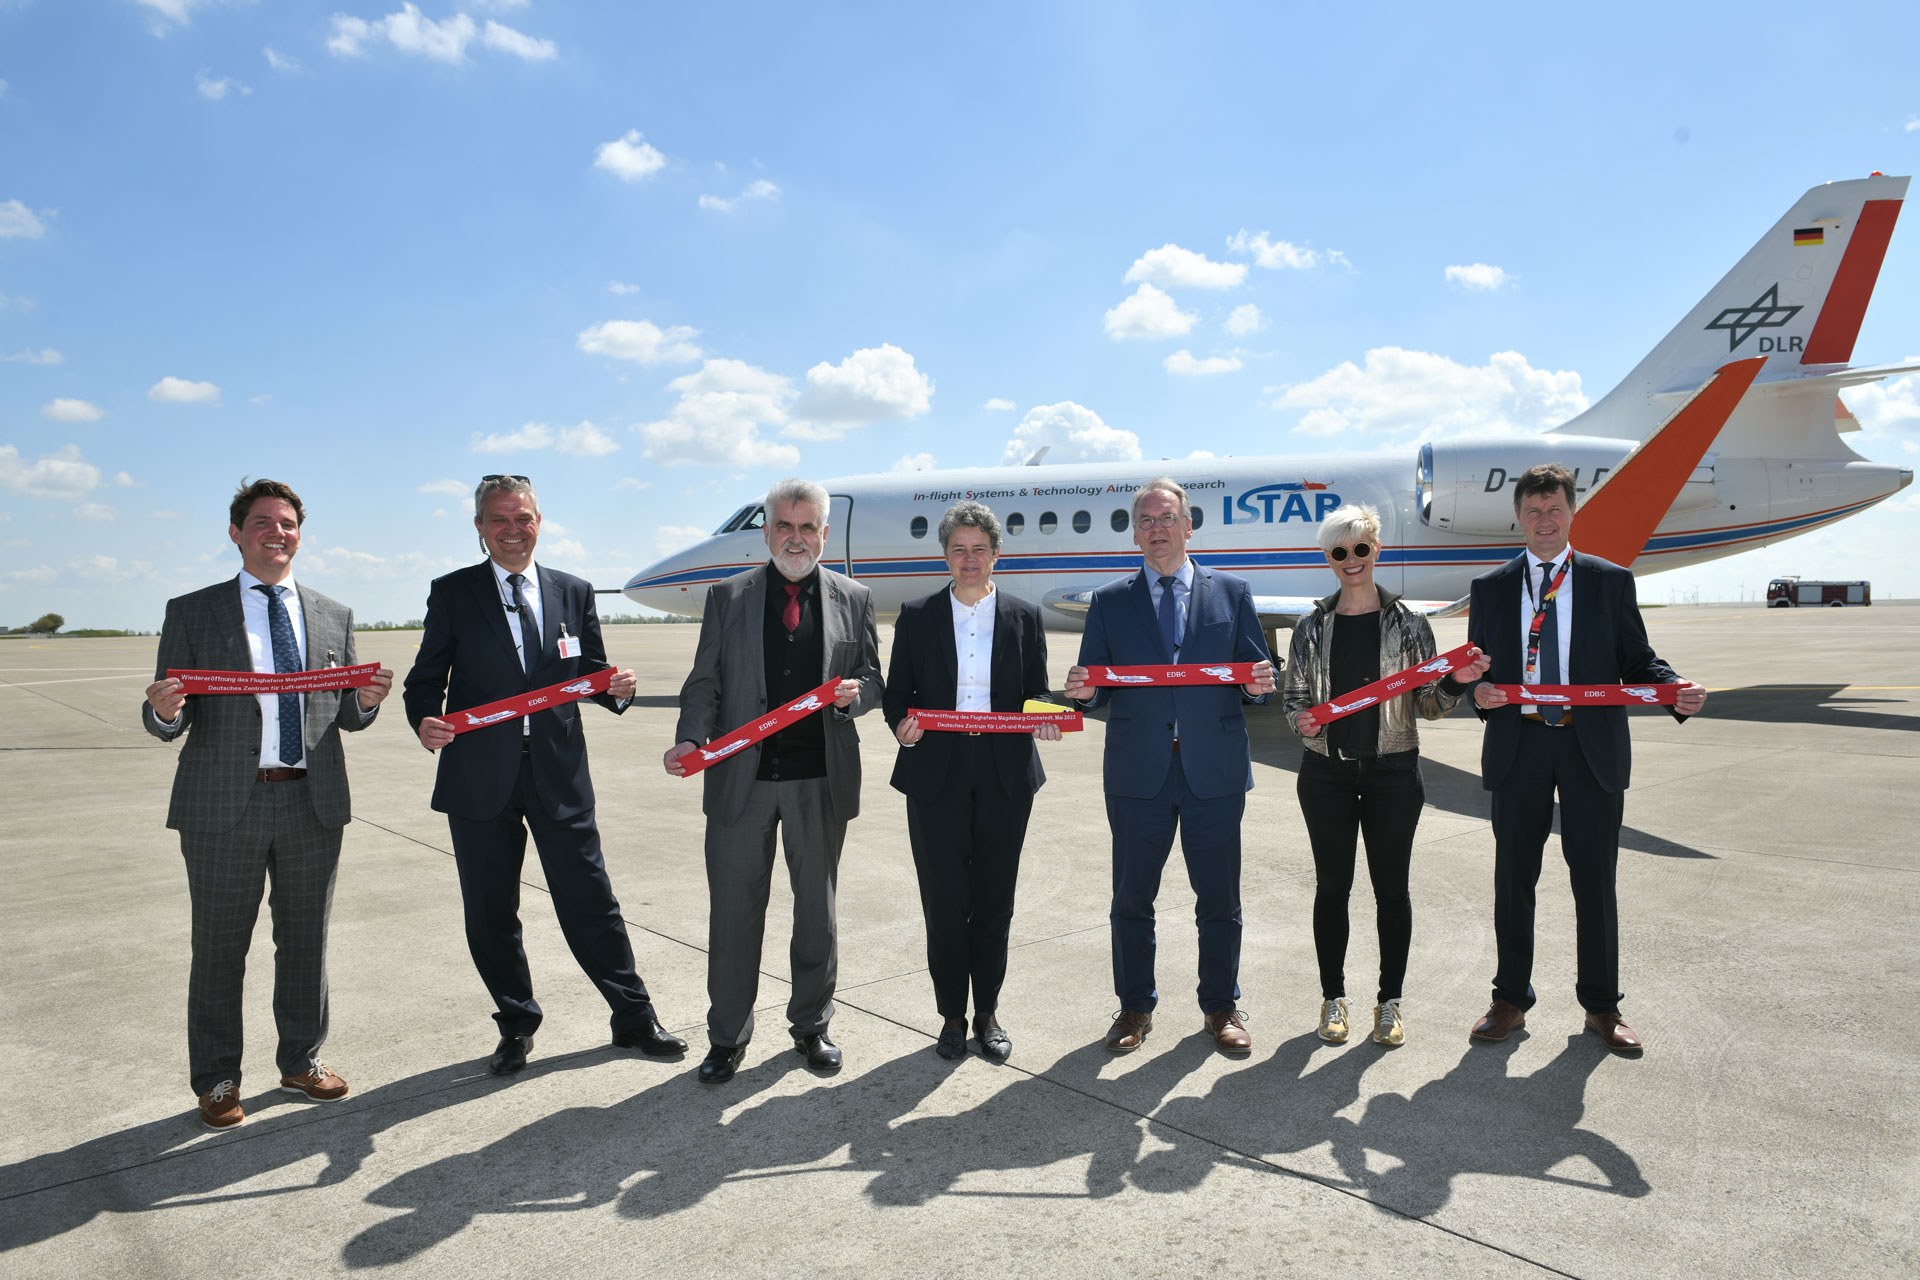 Ceremonial opening of Magdeburg/Cochstedt Airport